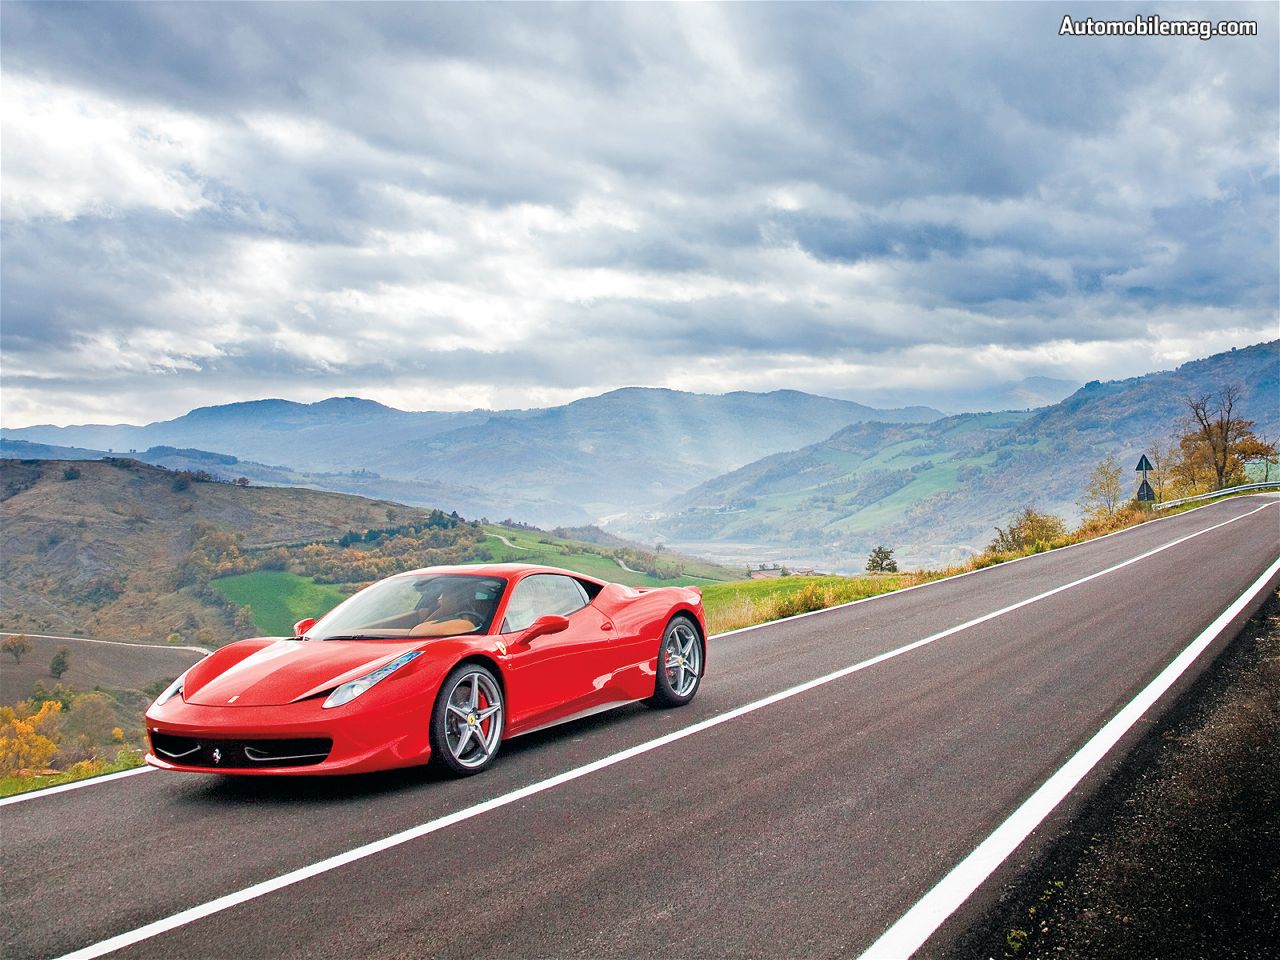 Ferrari Road Cars Are Used As A Symbol Of Luxury And Wealth